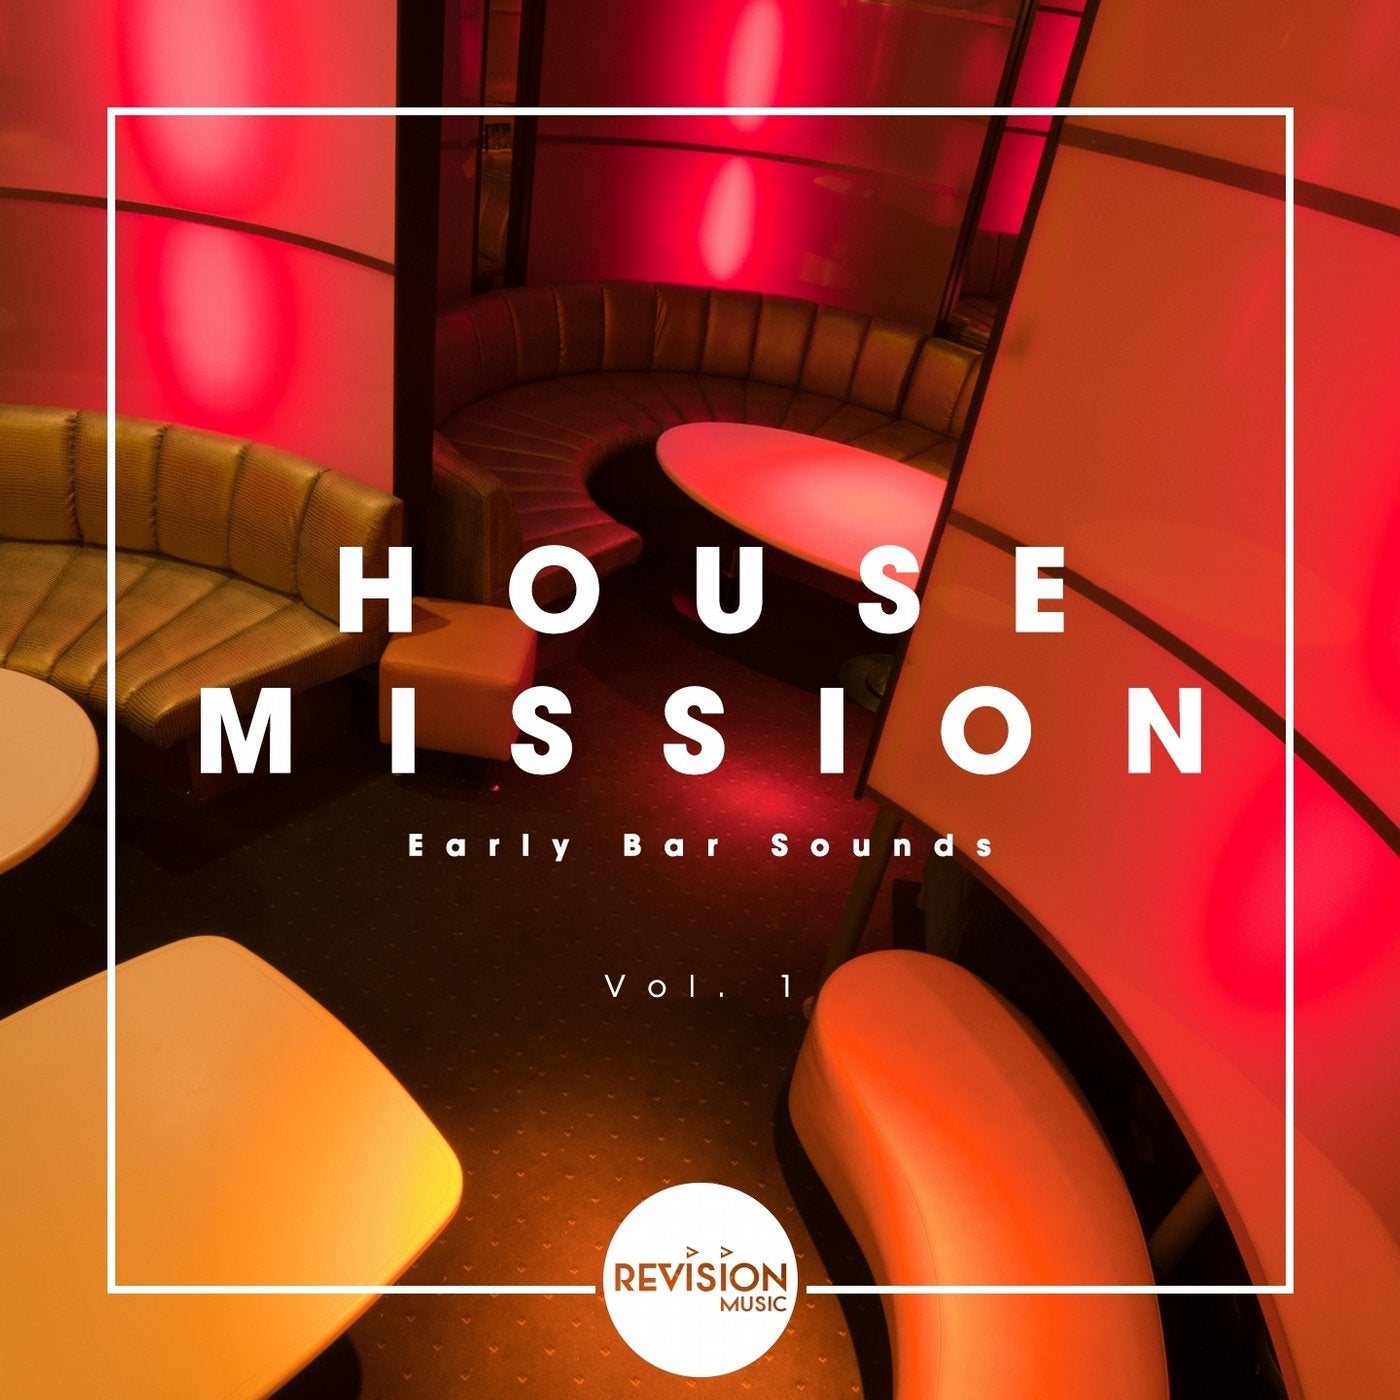 House Mission - Early Bar Sounds, Vol. 1